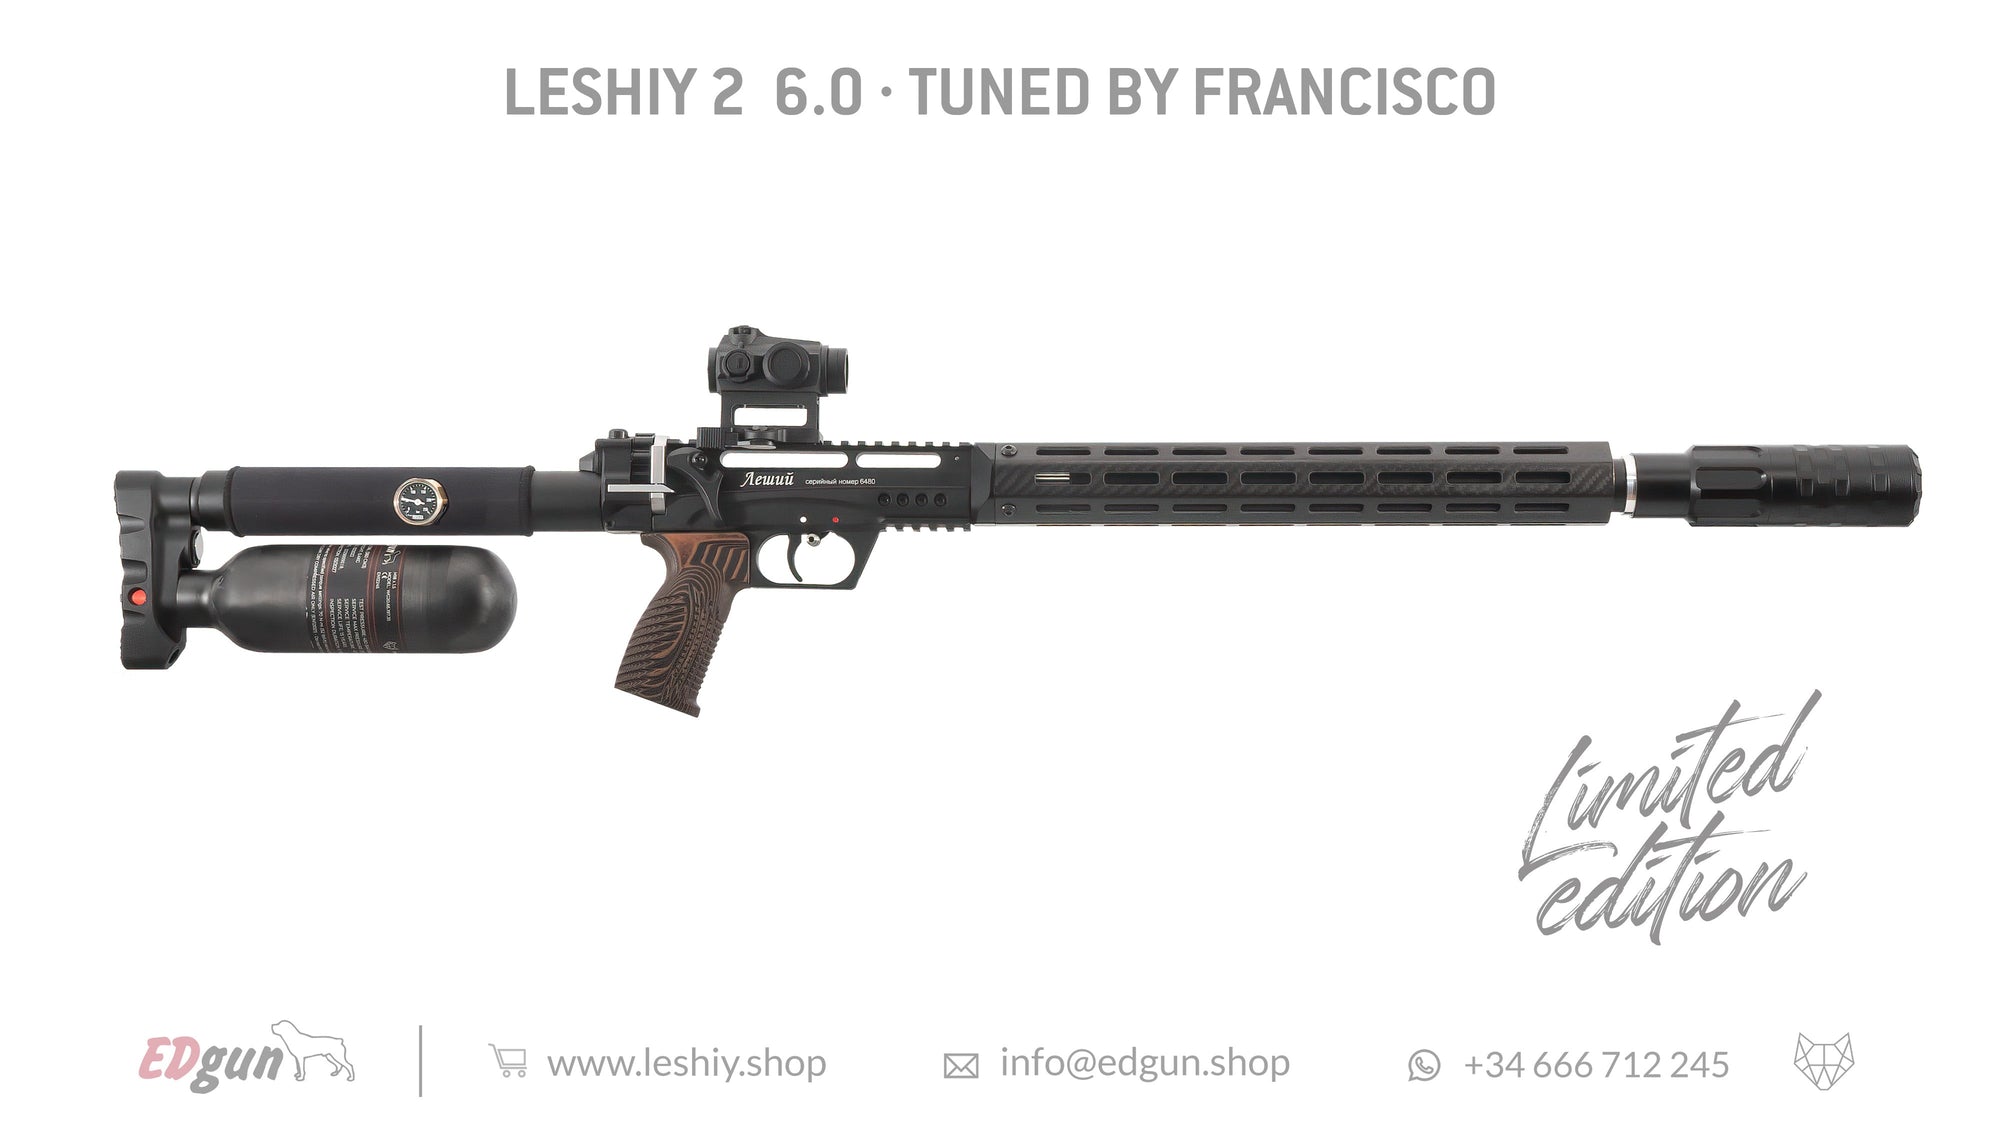 Leshiy 2 Limited Edition 6.0 Tuned by Francisco